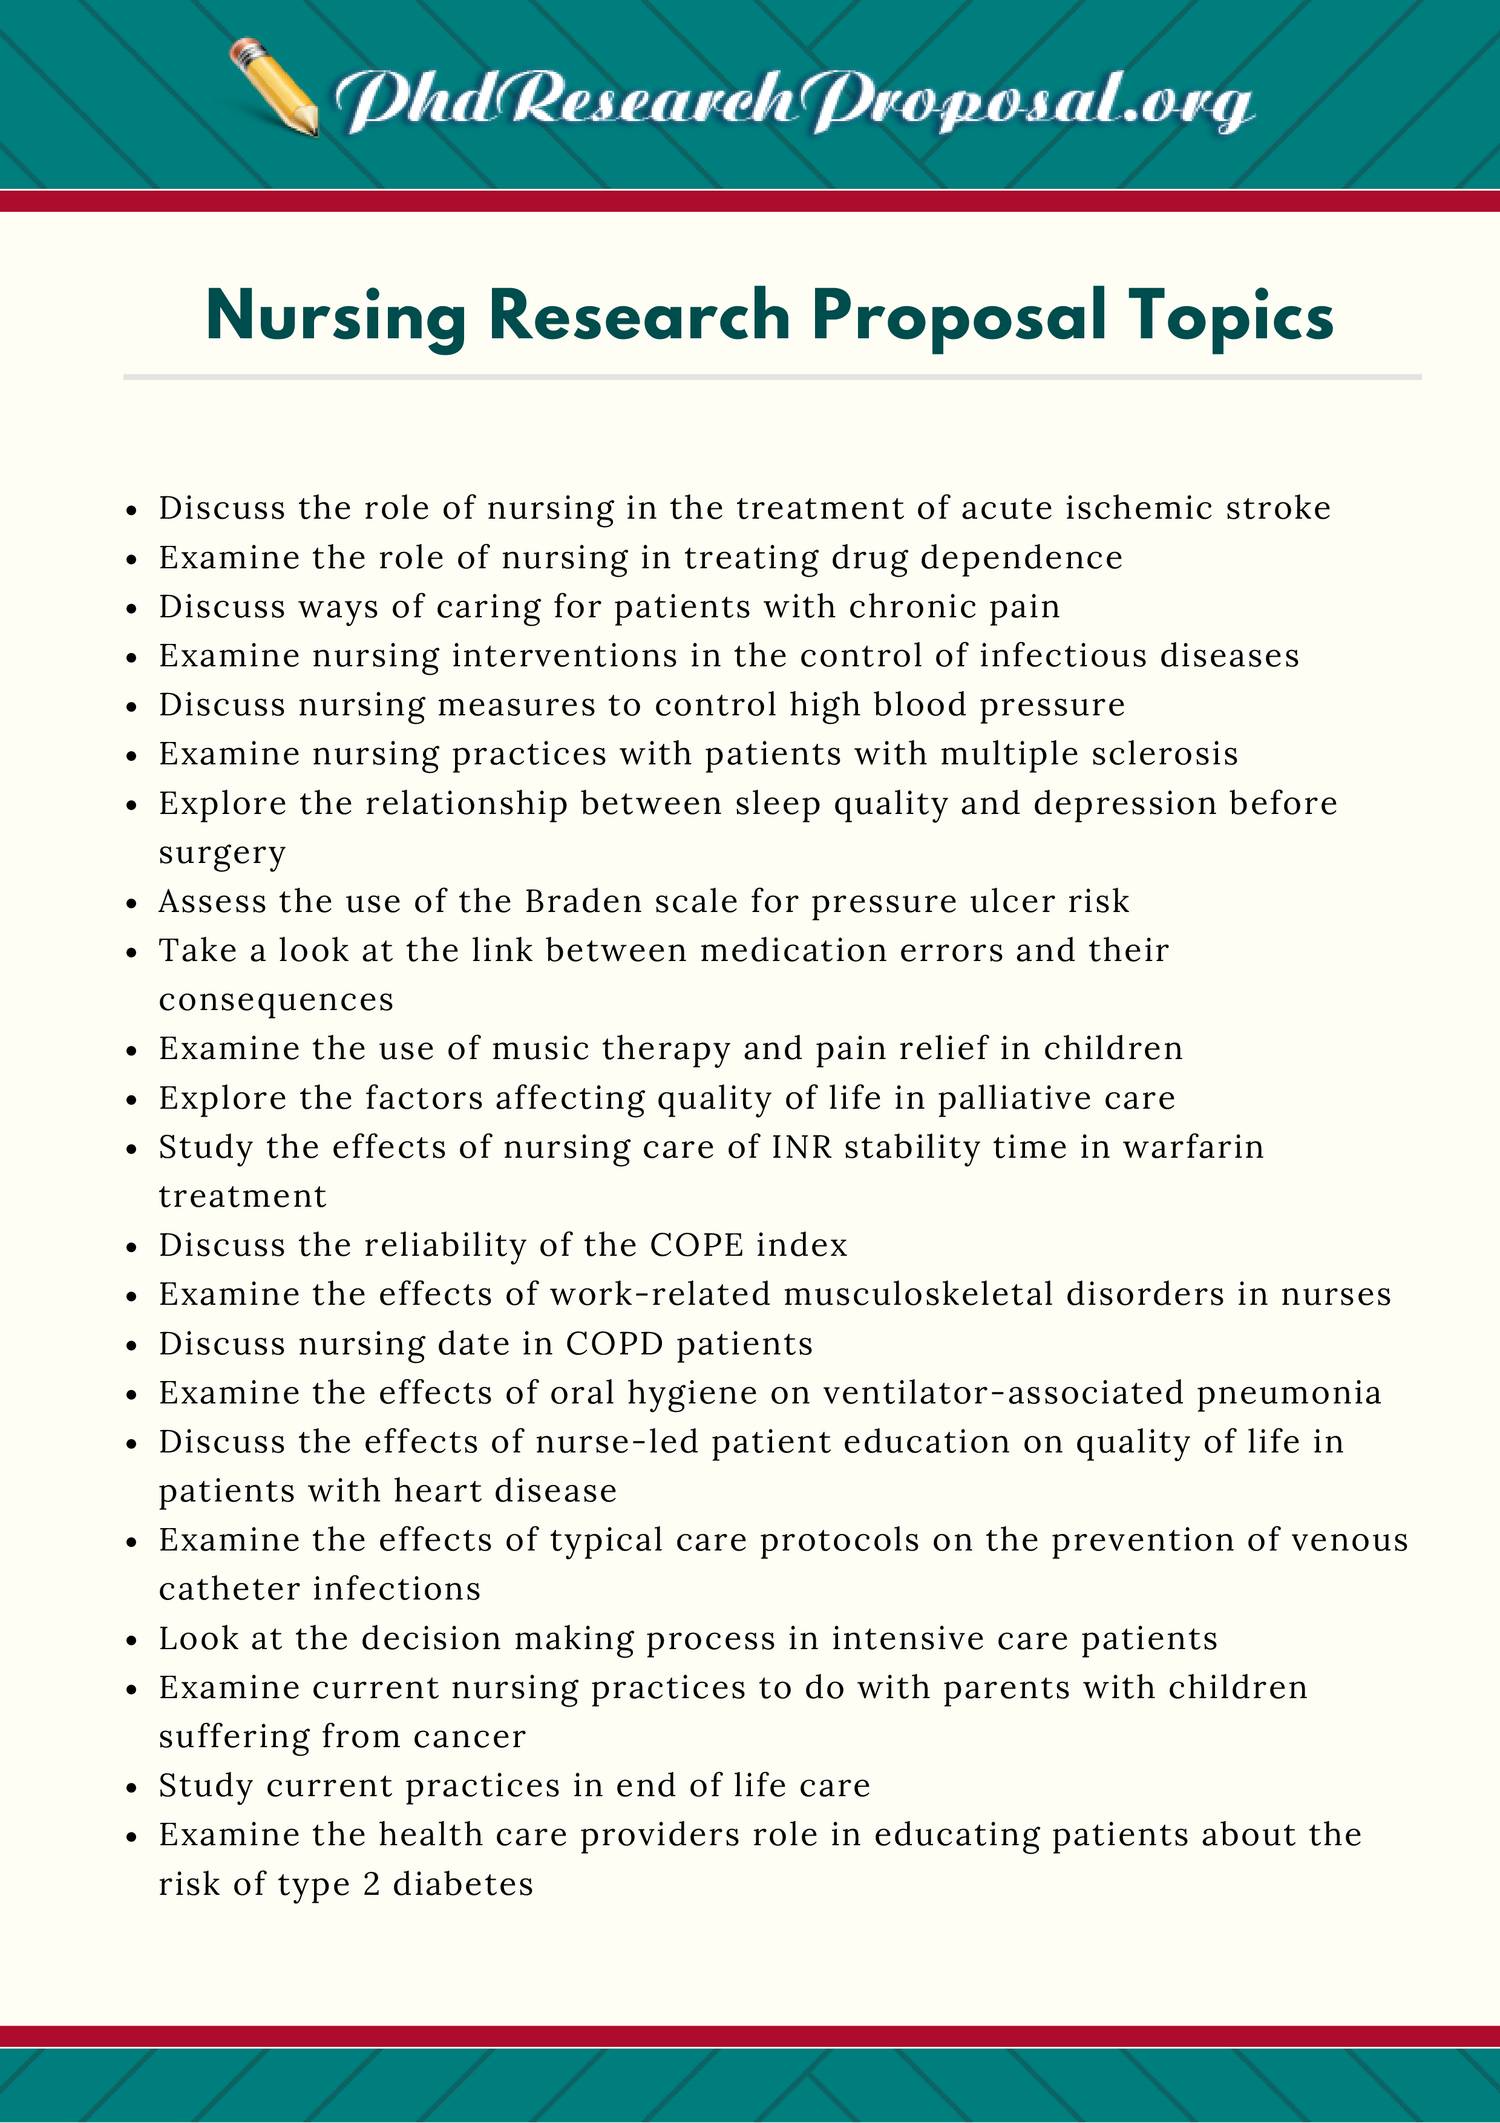 nursing research topics for gnm students